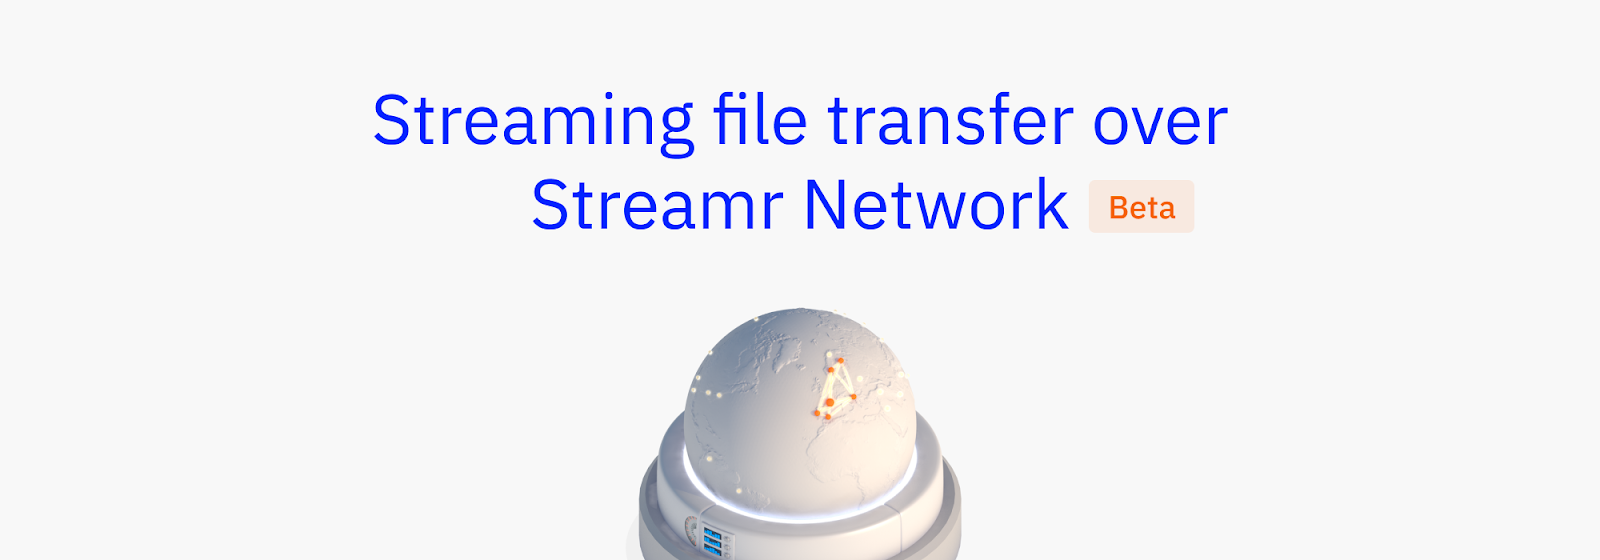 Streaming file transfers over the Streamr Network